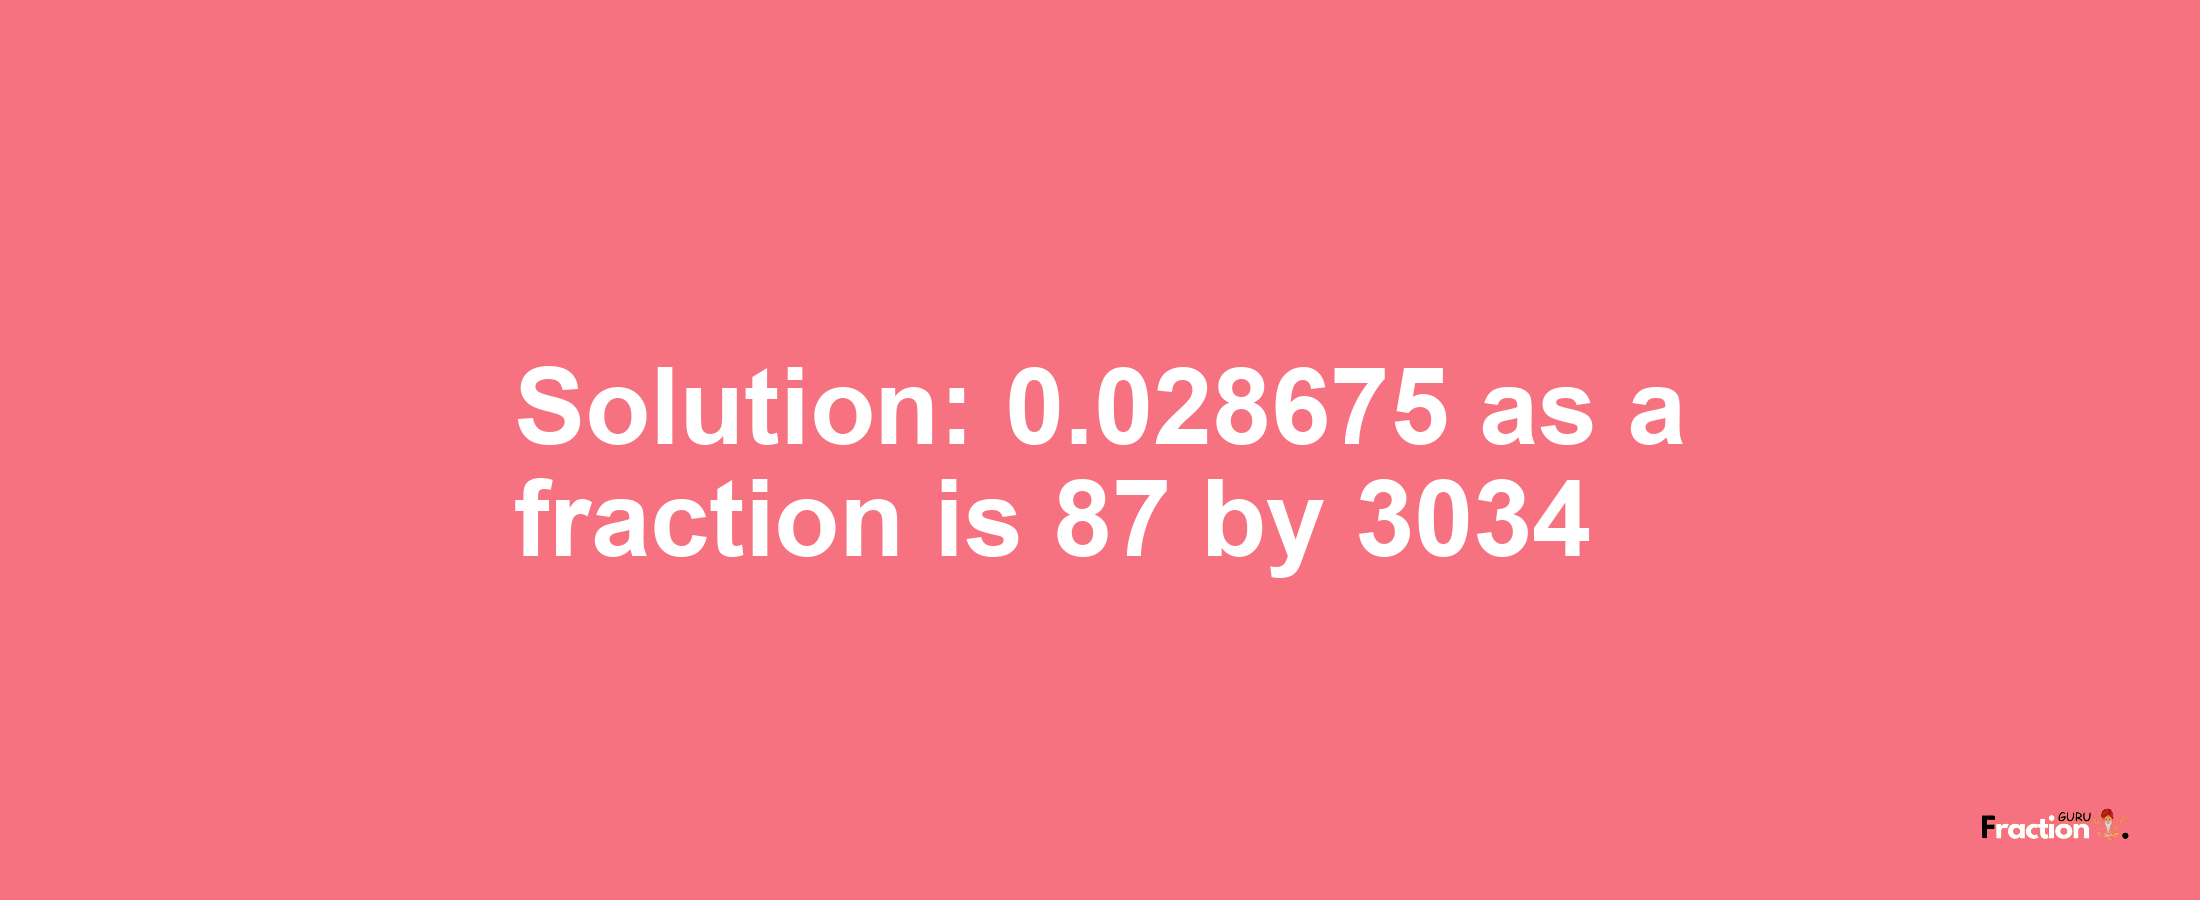 Solution:0.028675 as a fraction is 87/3034